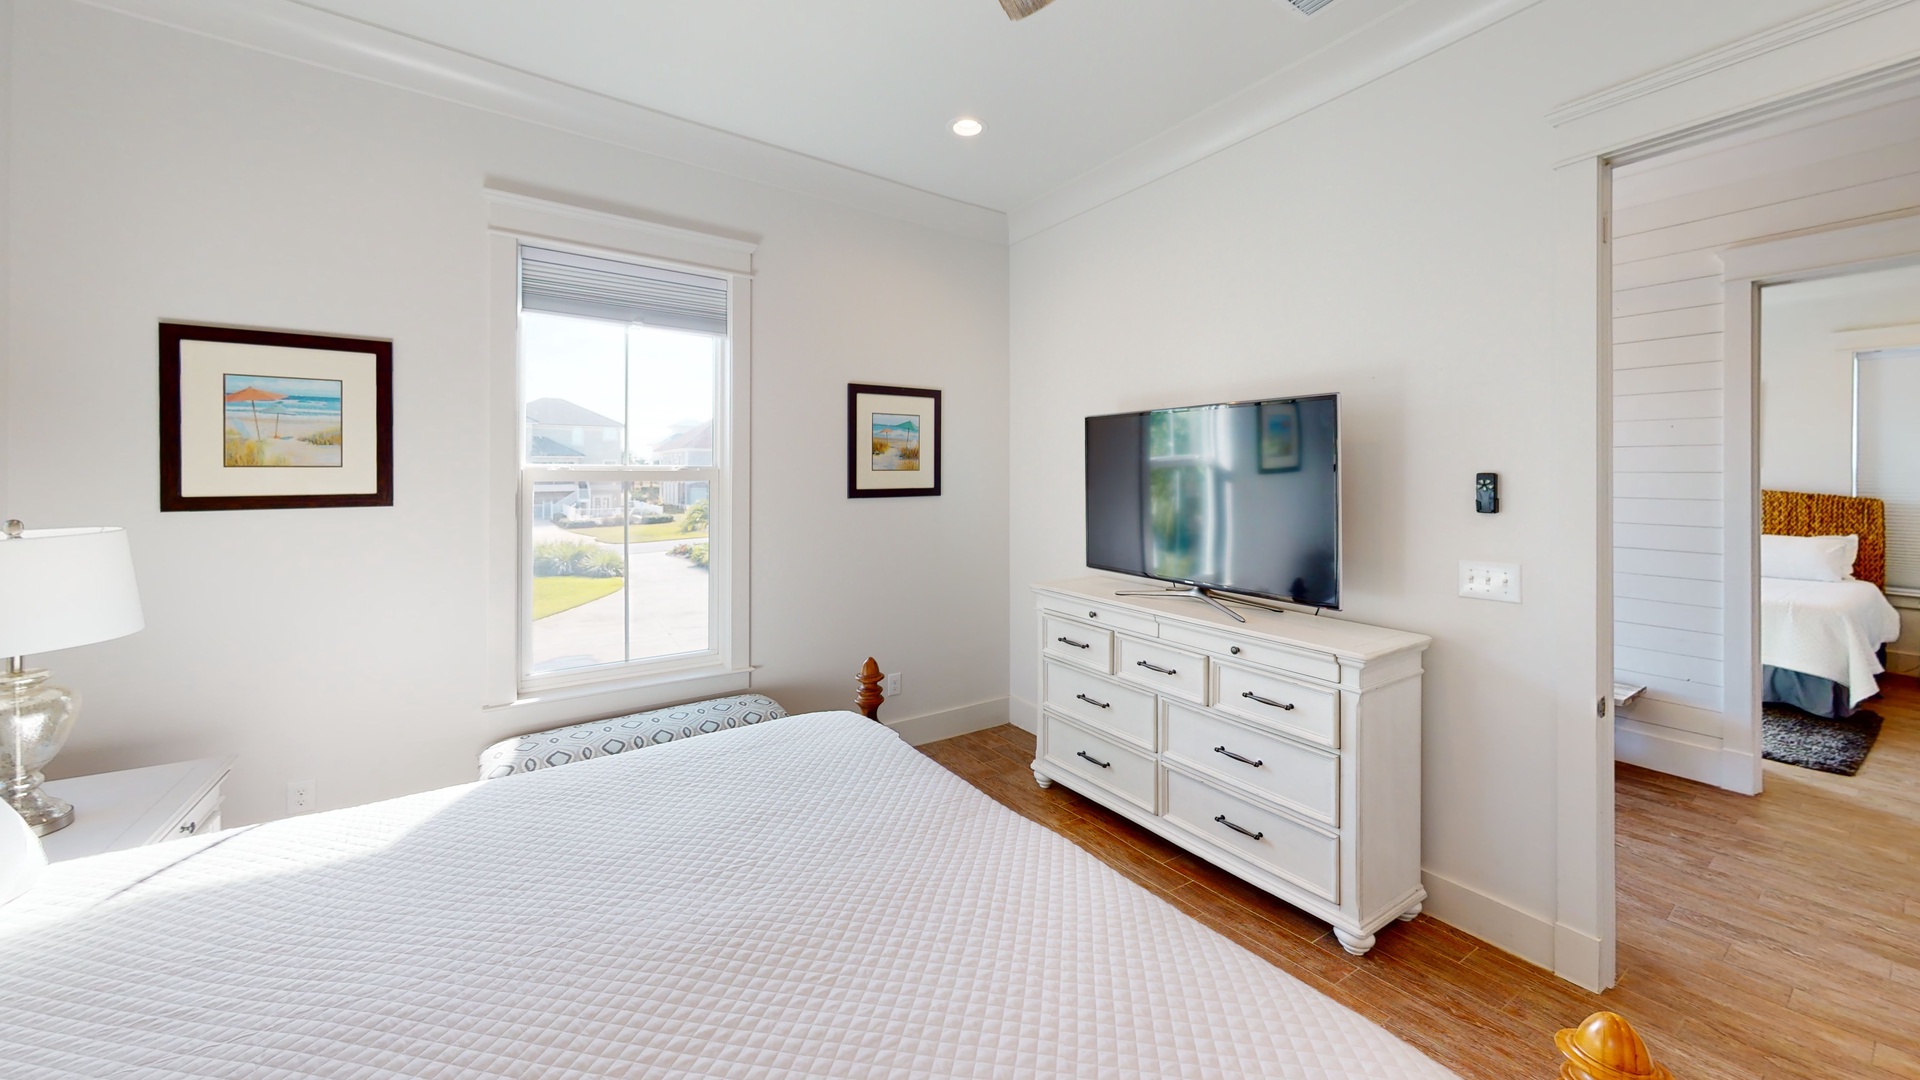 The Master bedroom features a TV and a private luxury bathroom.